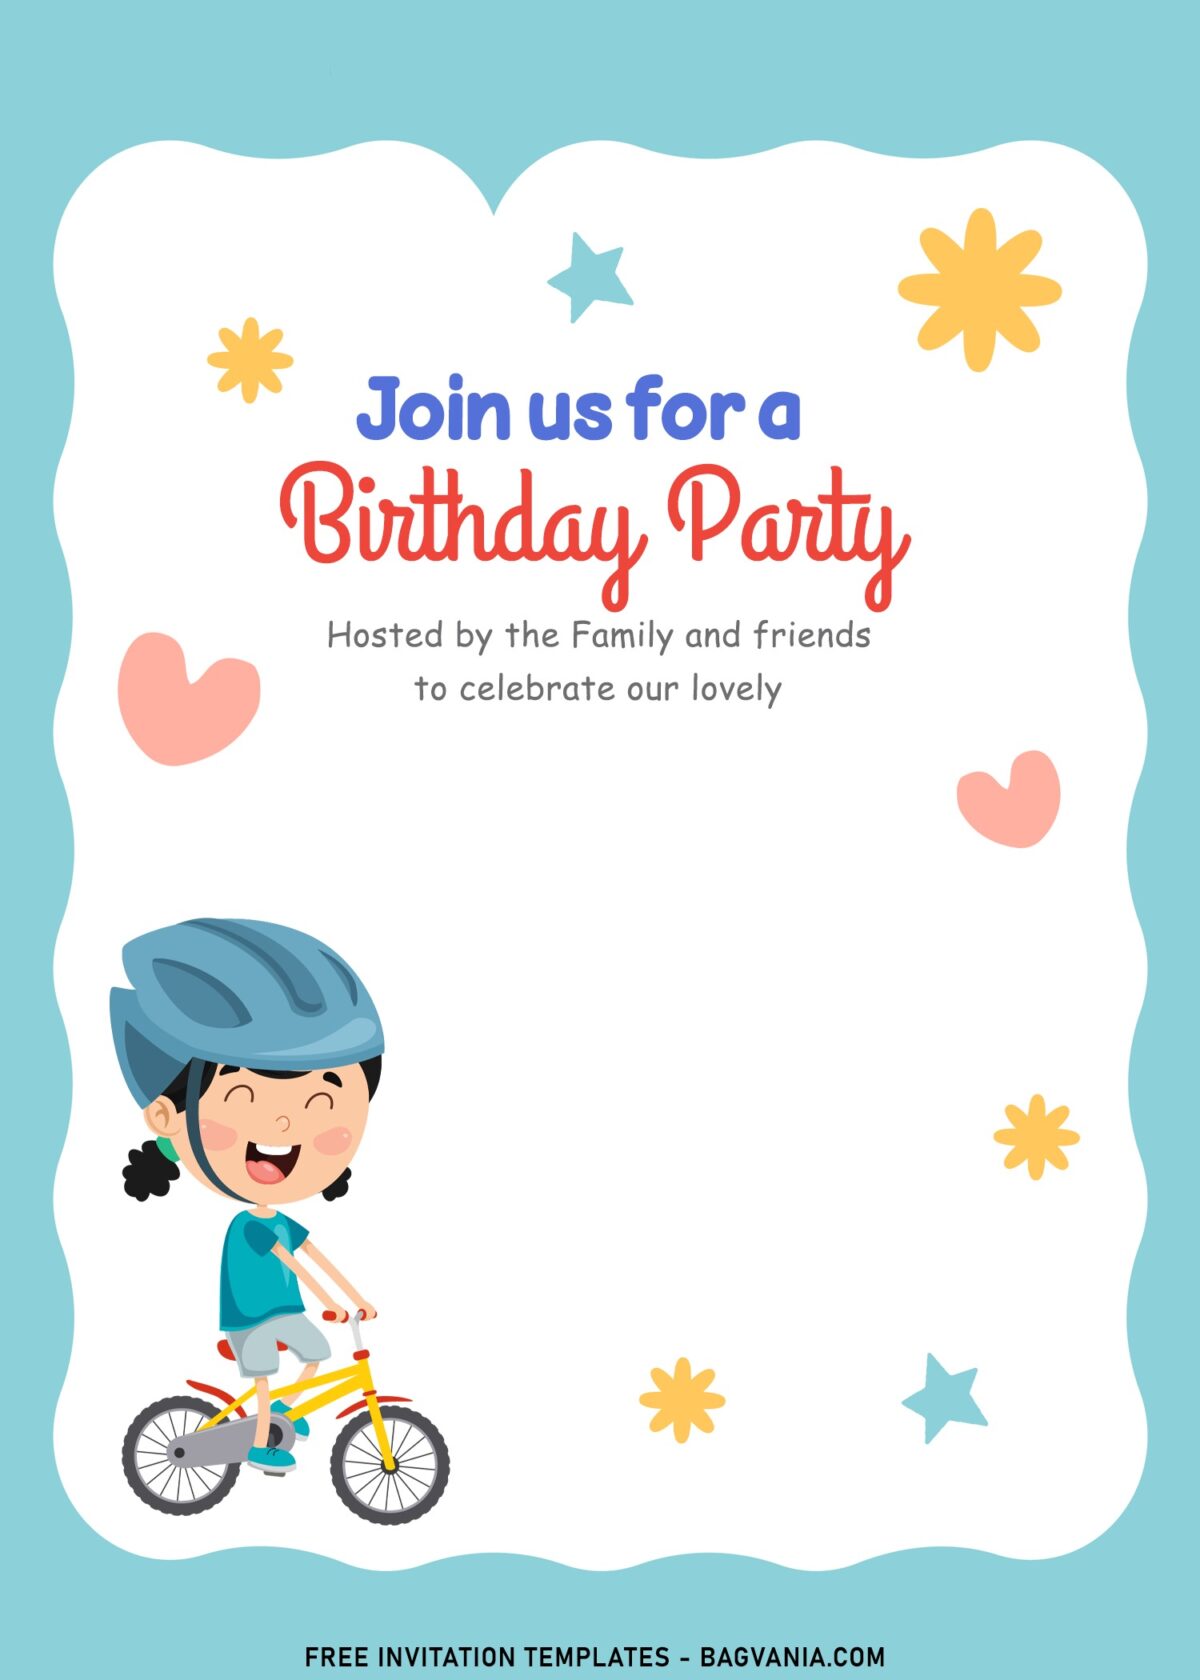 9+ Playful And Adorable Kids Birthday Invitation Templates For All Ages with adorable little girl is riding her bike